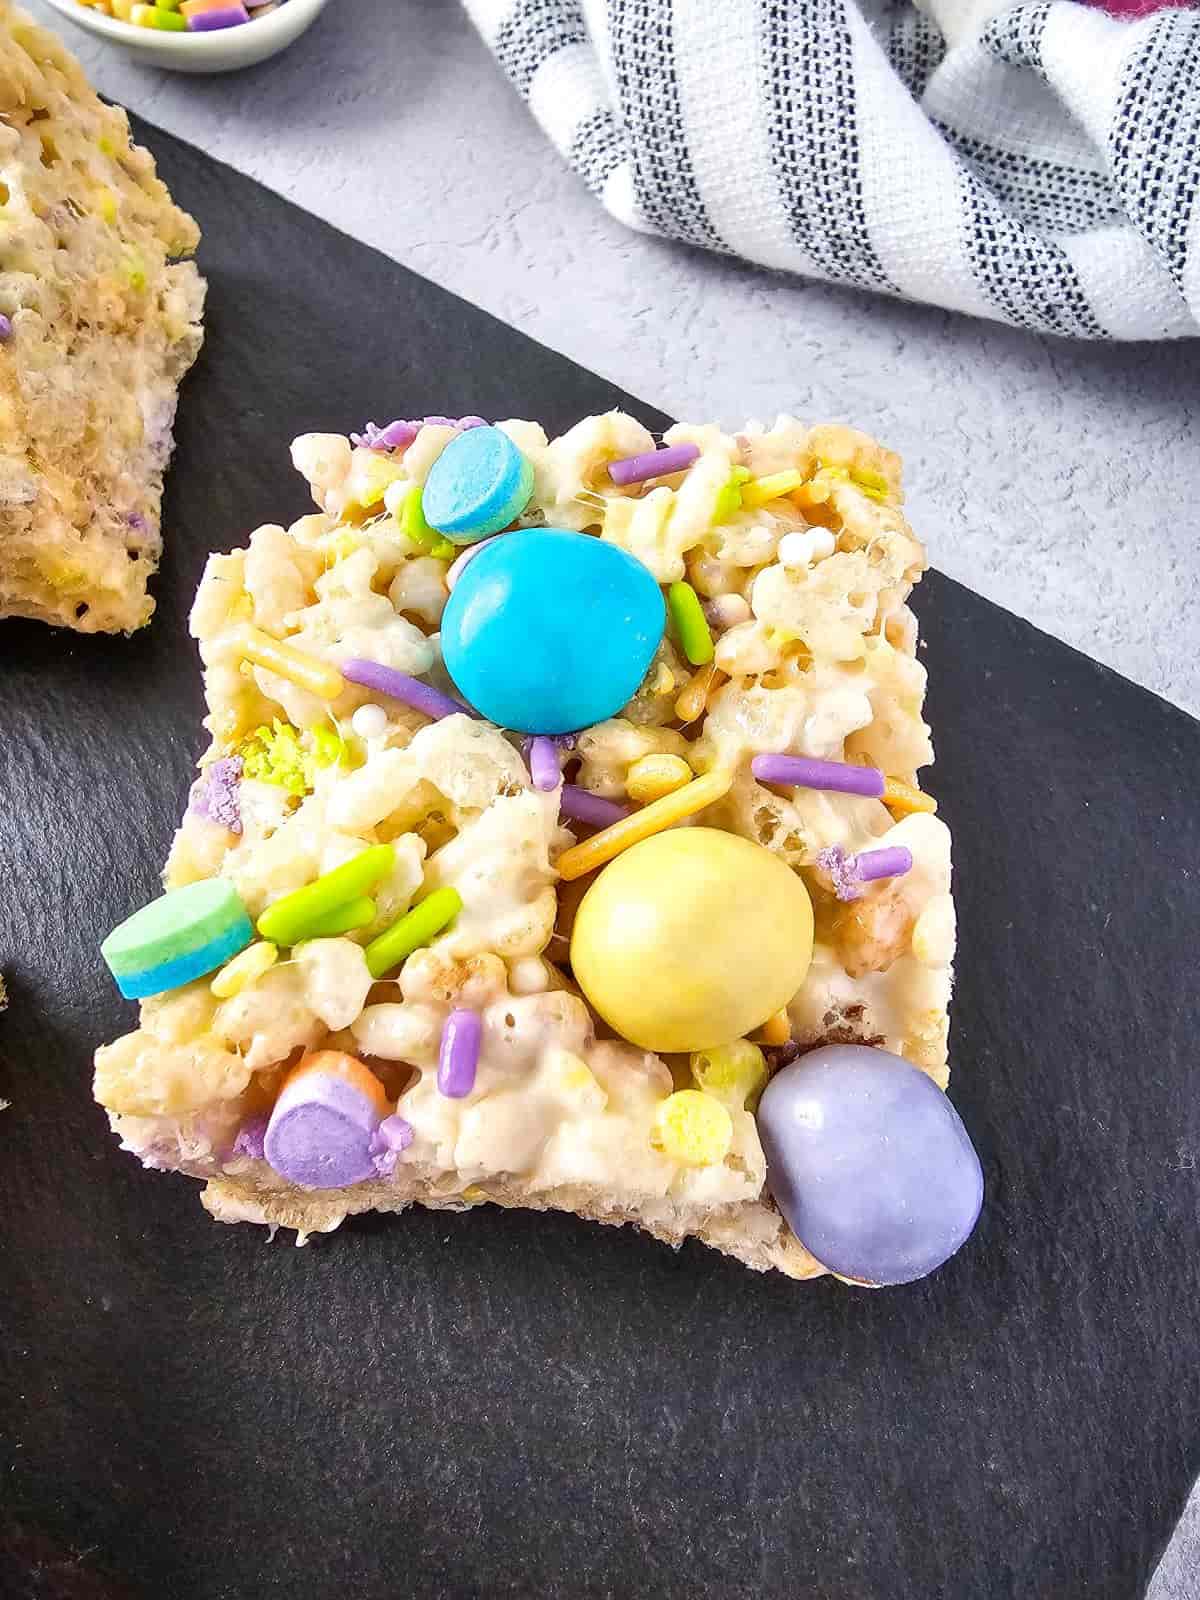 M&Ms rice krispie treat topped with colorful candy and sprinkles on a serving board.